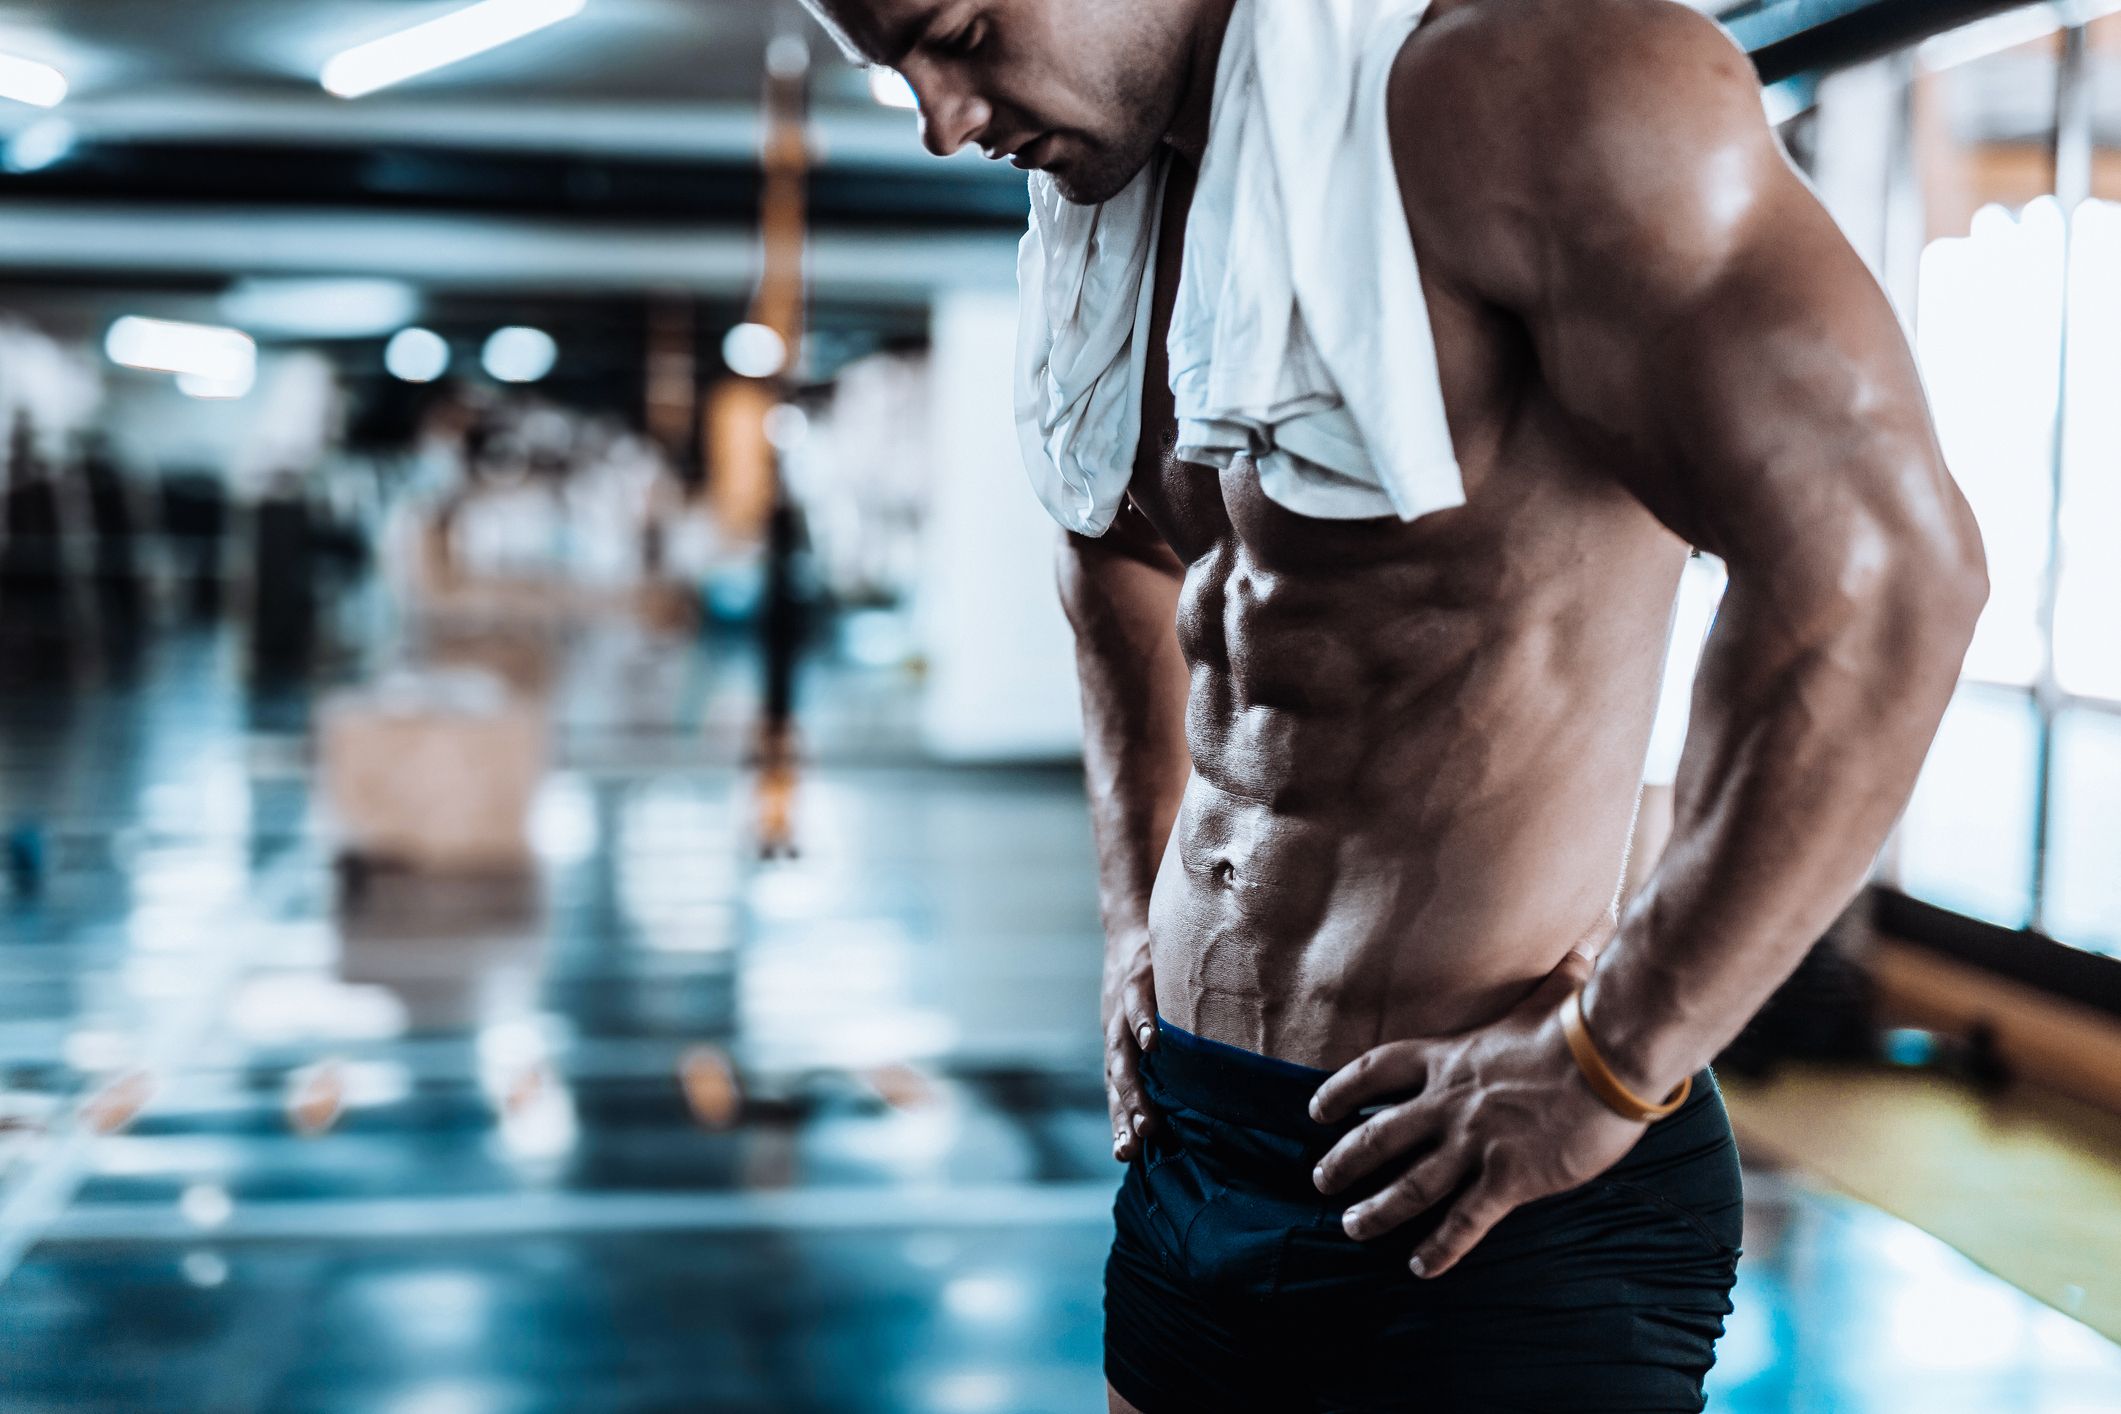 Workout Abs Man: The Ultimate Core Workout for Defined Abs